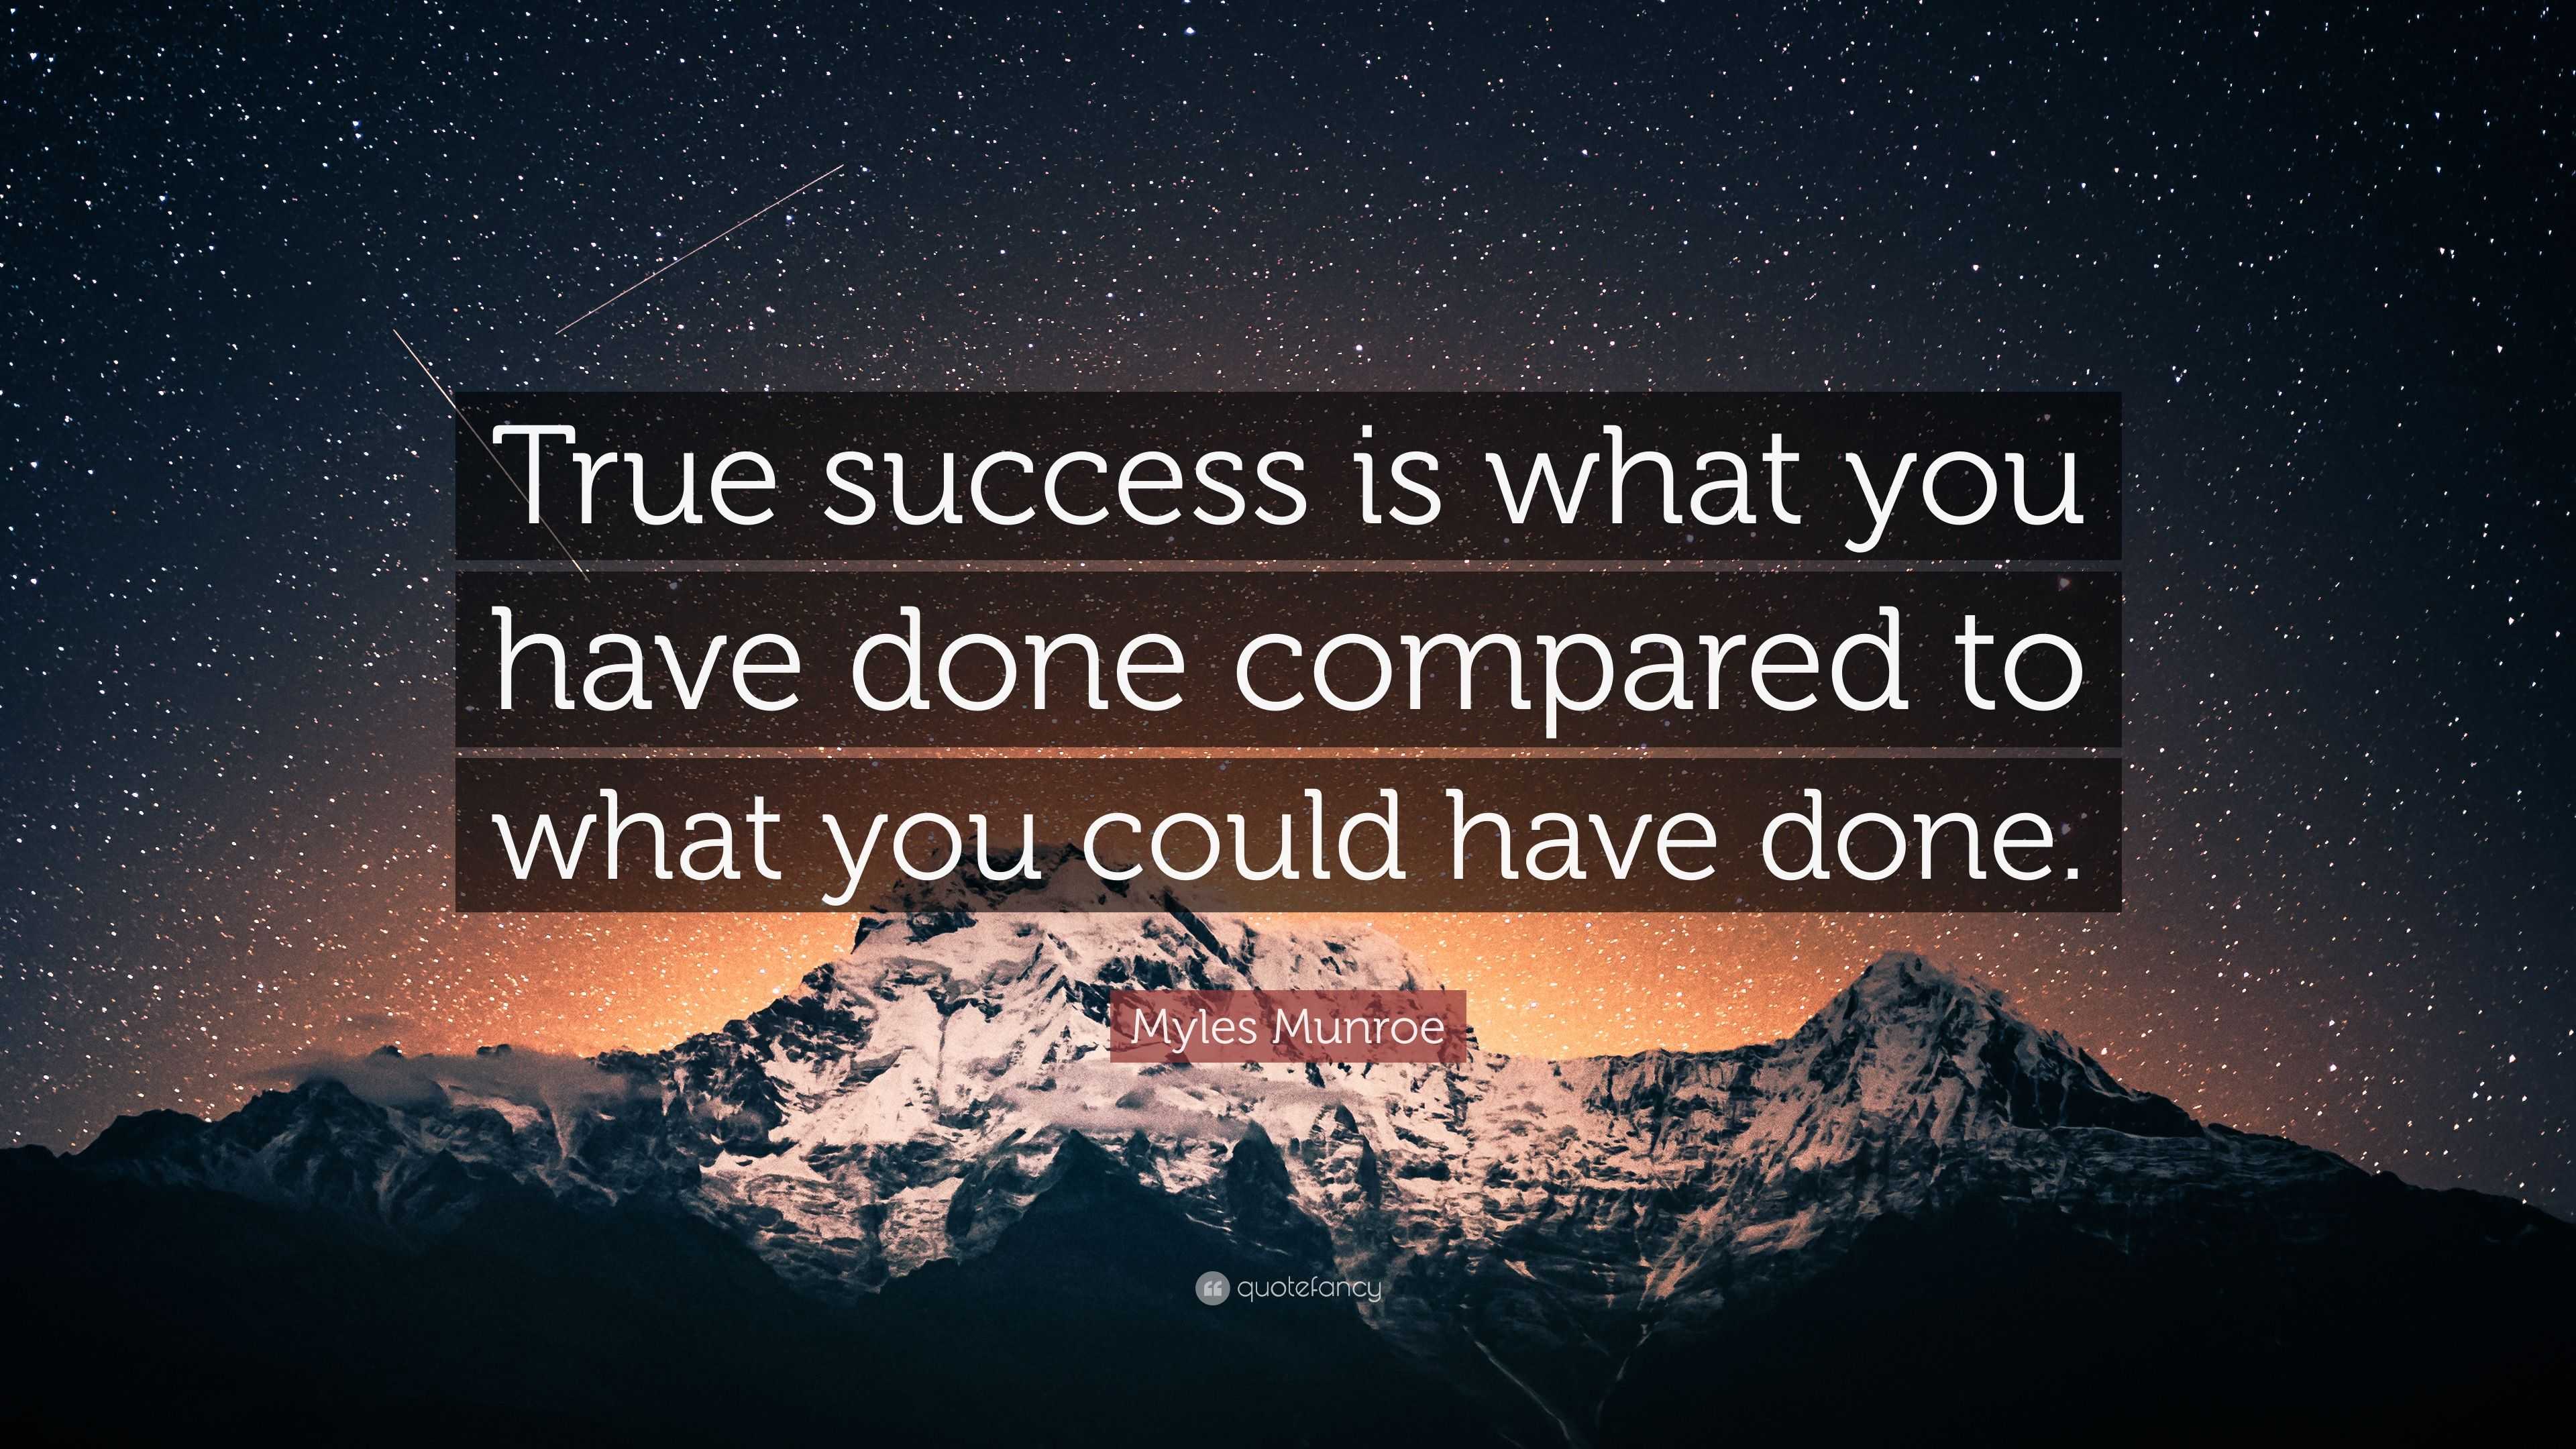 Myles Munroe Quote: “True success is what you have done compared to ...